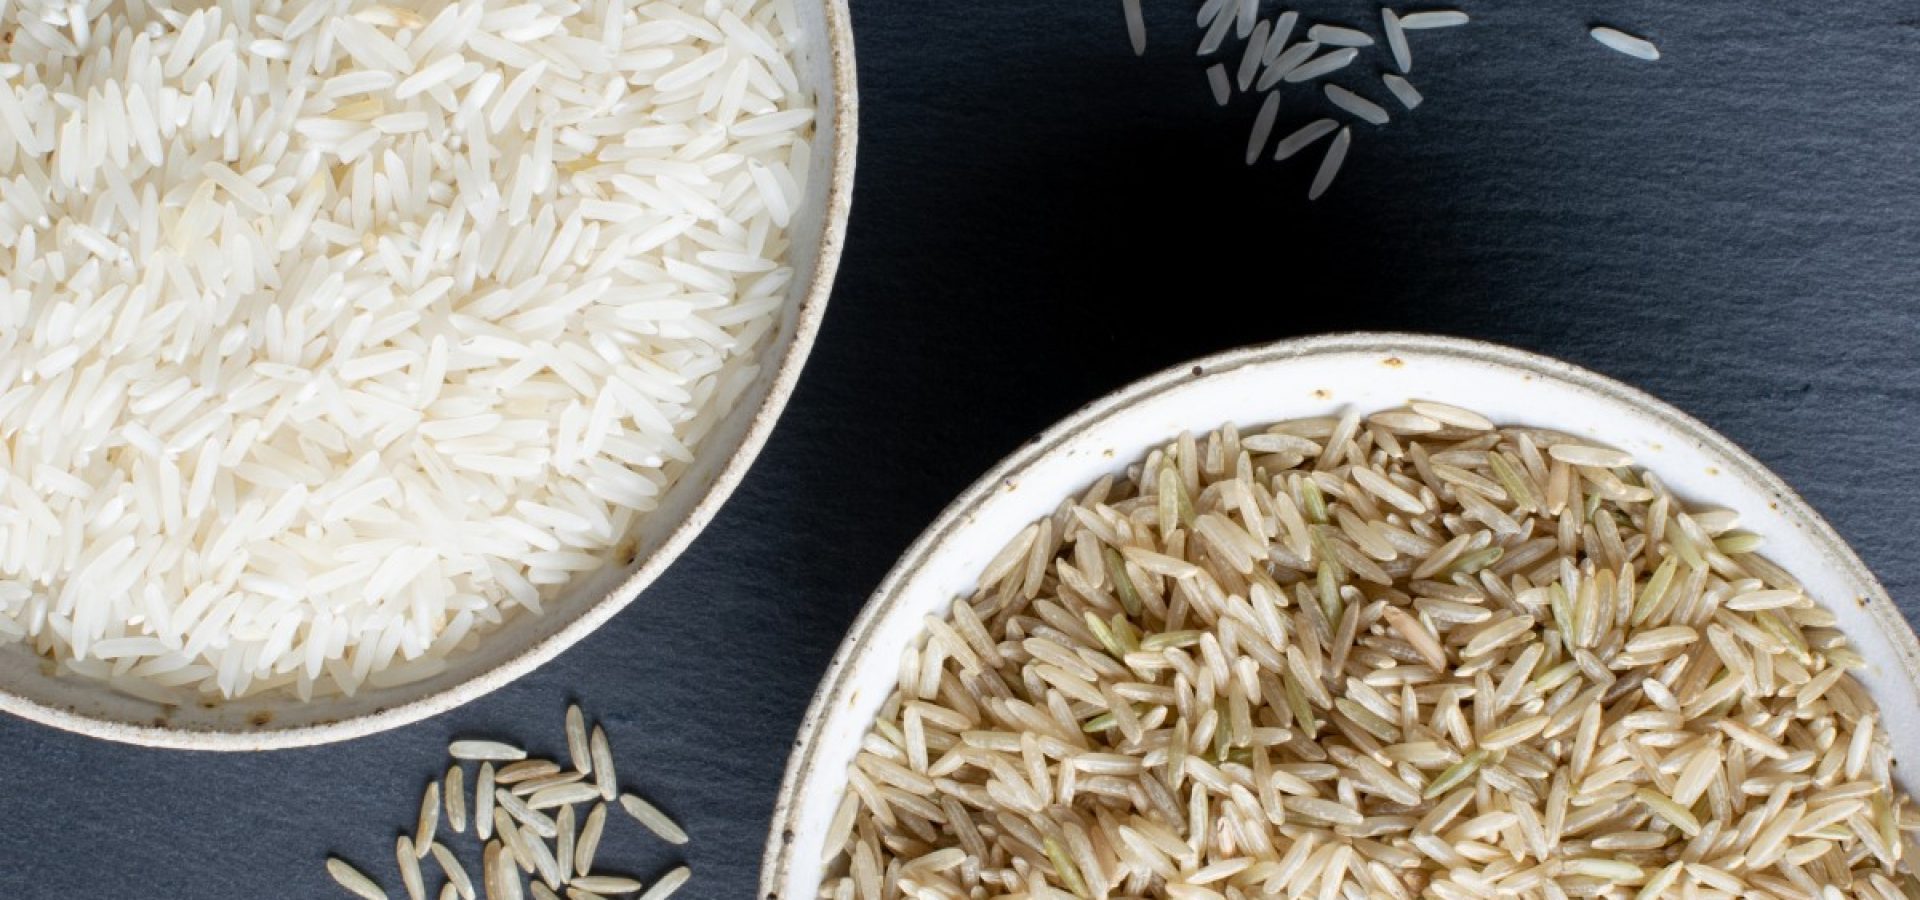 Iran Wants to Stop Importing Rice from India and Pakistan